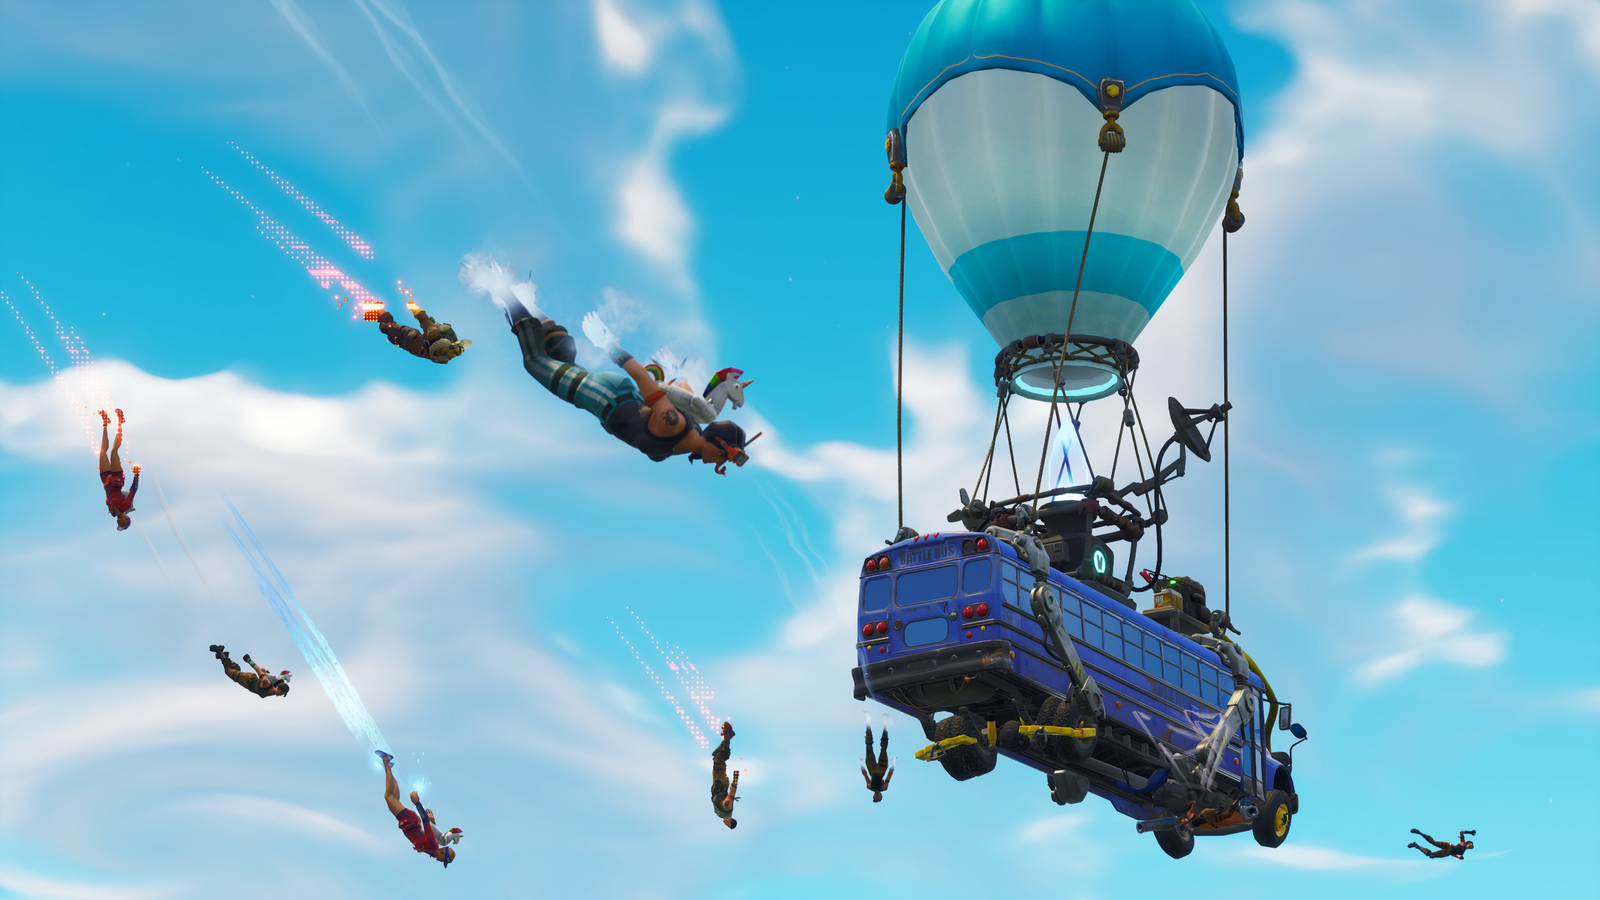 Download & Drop into Fortnite Now!, Fortnite Battle Royale - Play Free Now  One giant map. A Battle Bus. 100 Players. 🏆Last One Standing Wins🏆, By  Fortnite